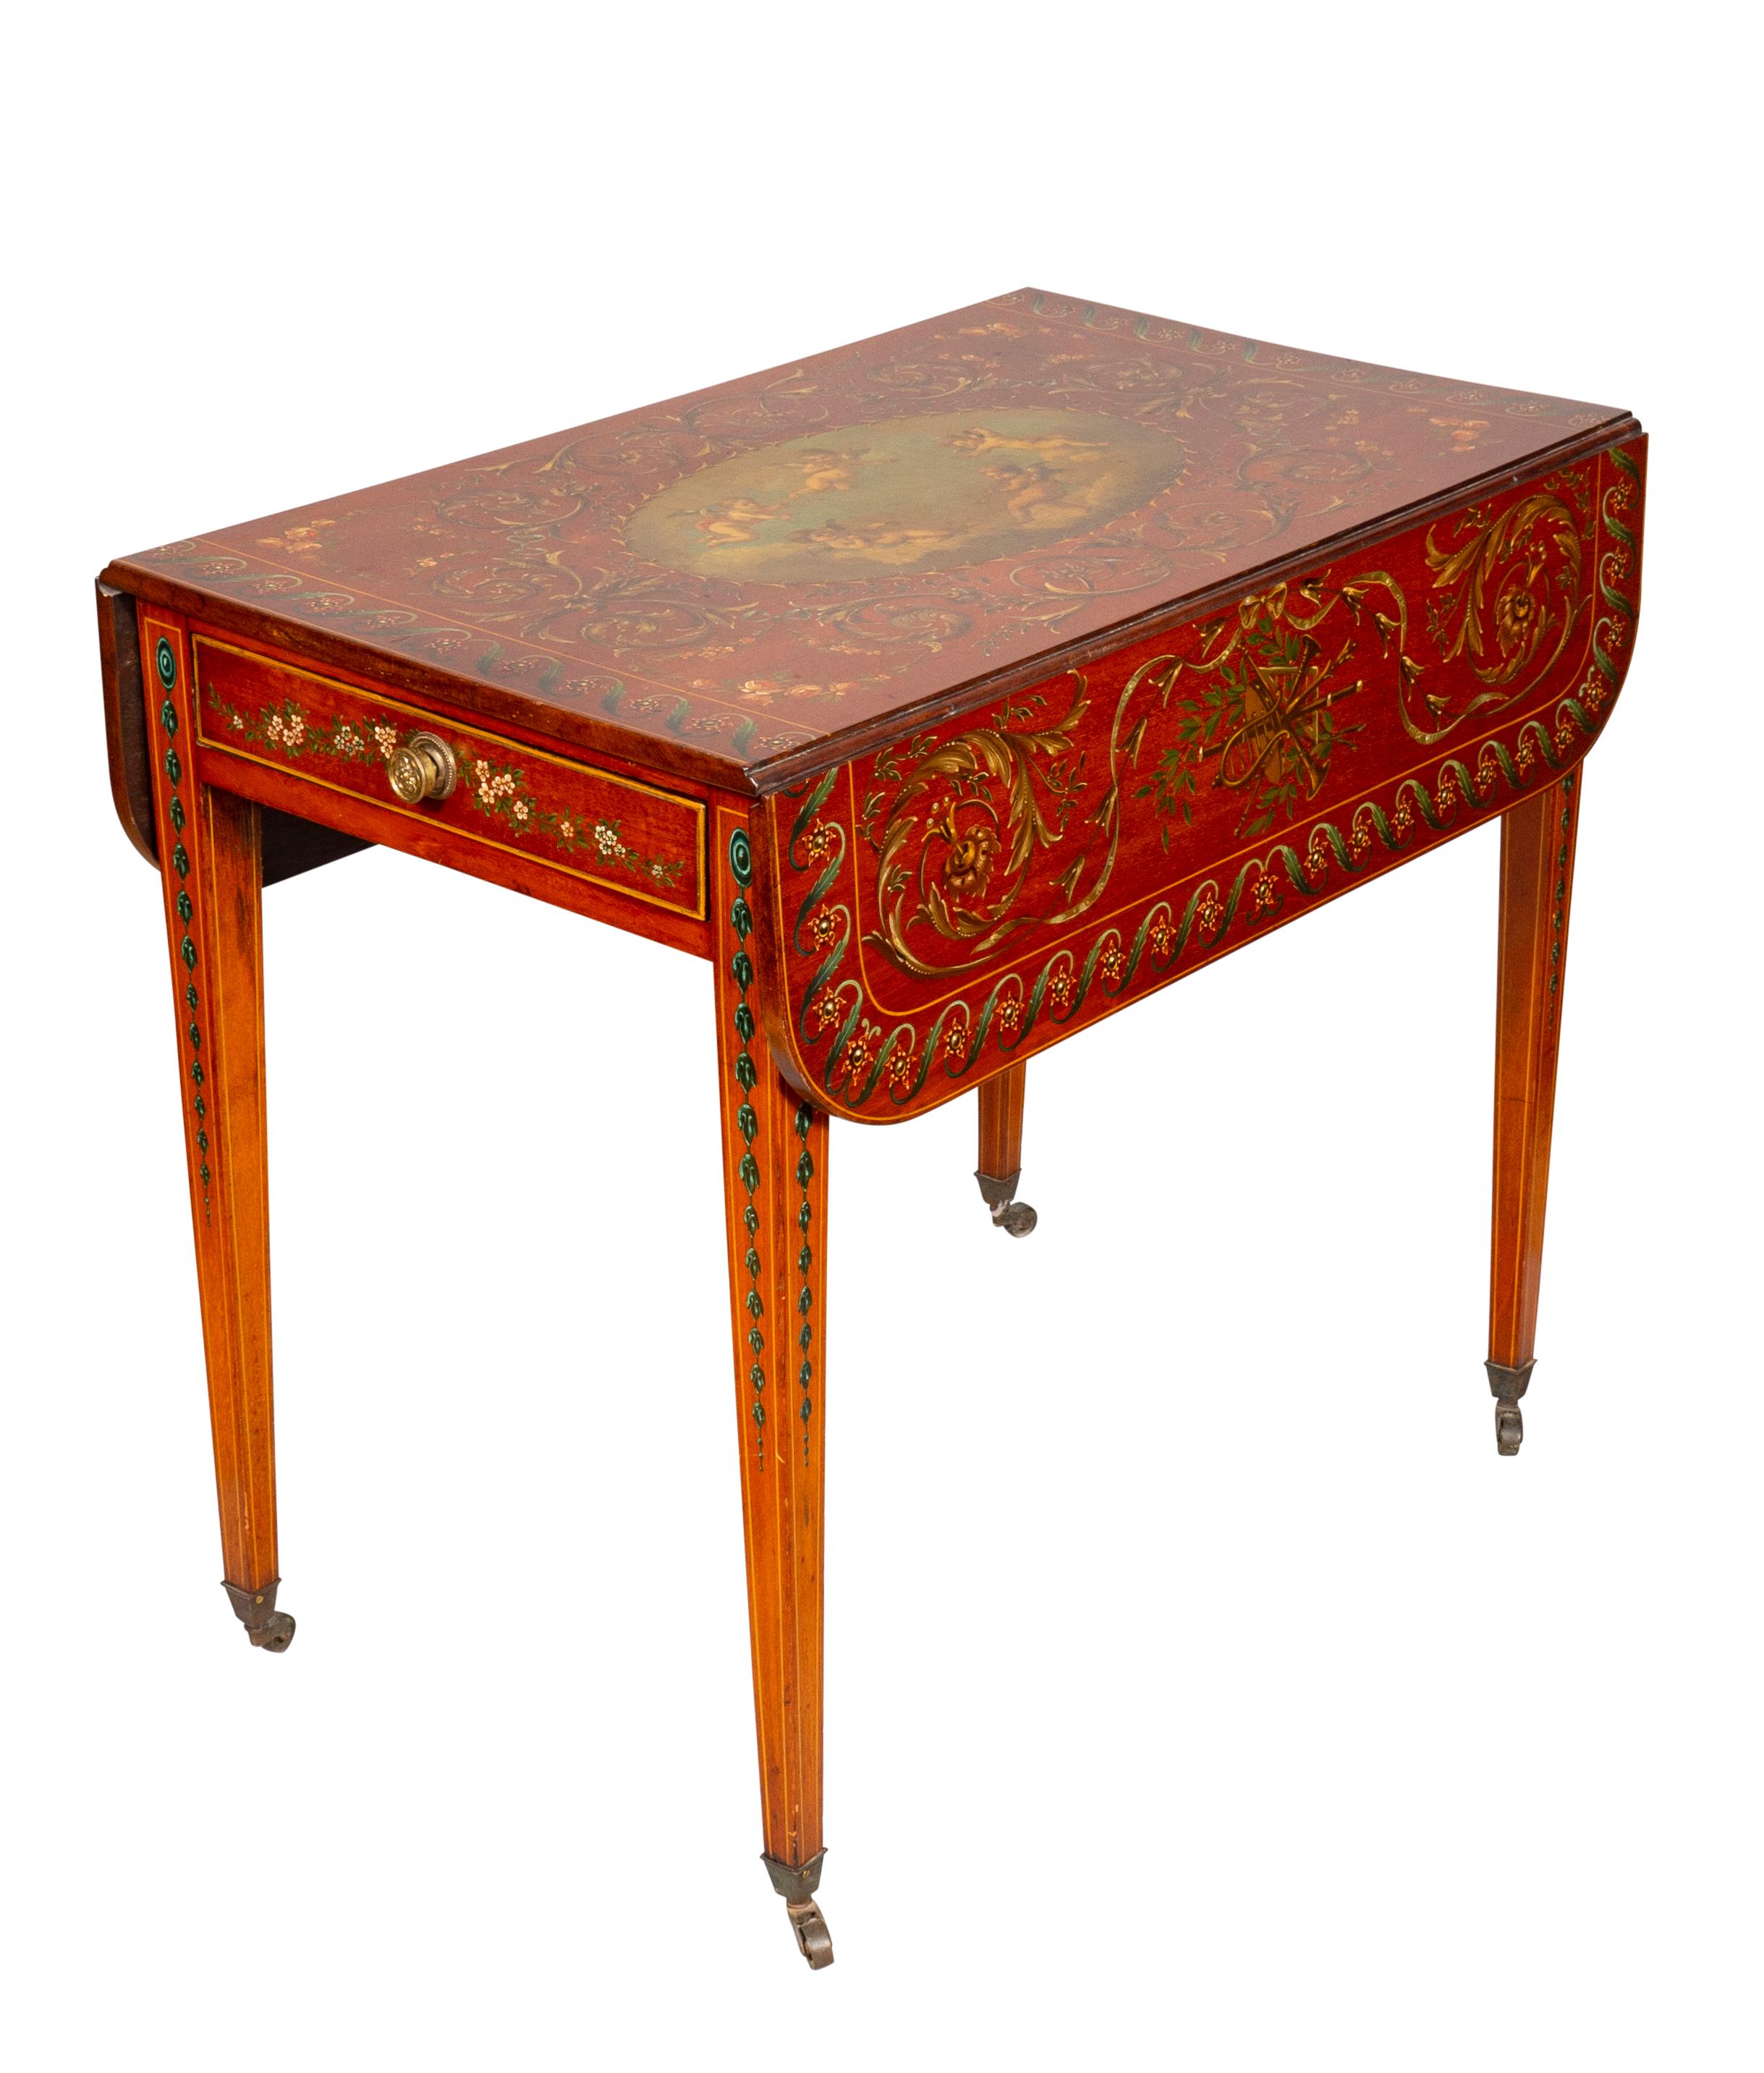 George III Edwardian Satinwood and Painted Pembroke Table For Sale